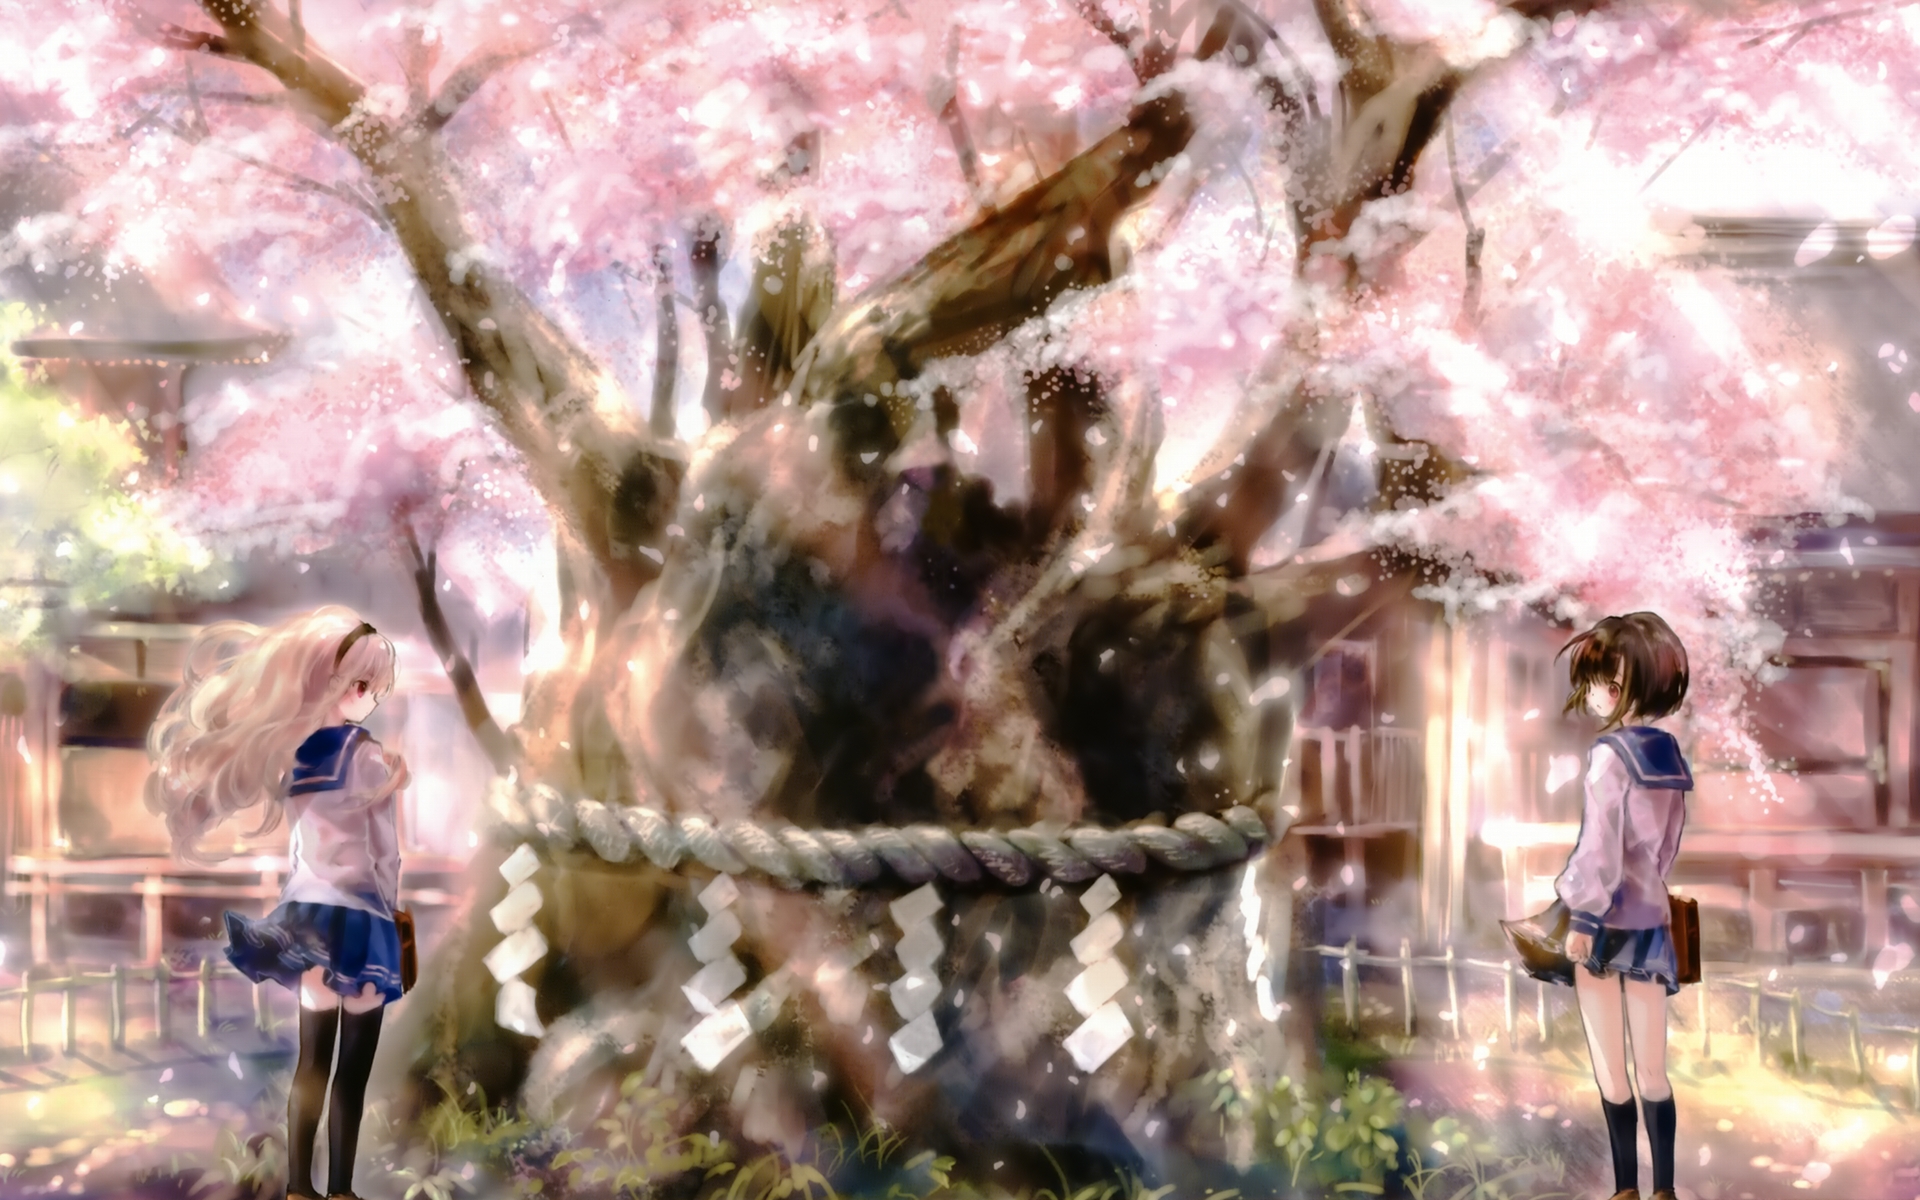 Anime girl under a cherry blossom tree in spring.